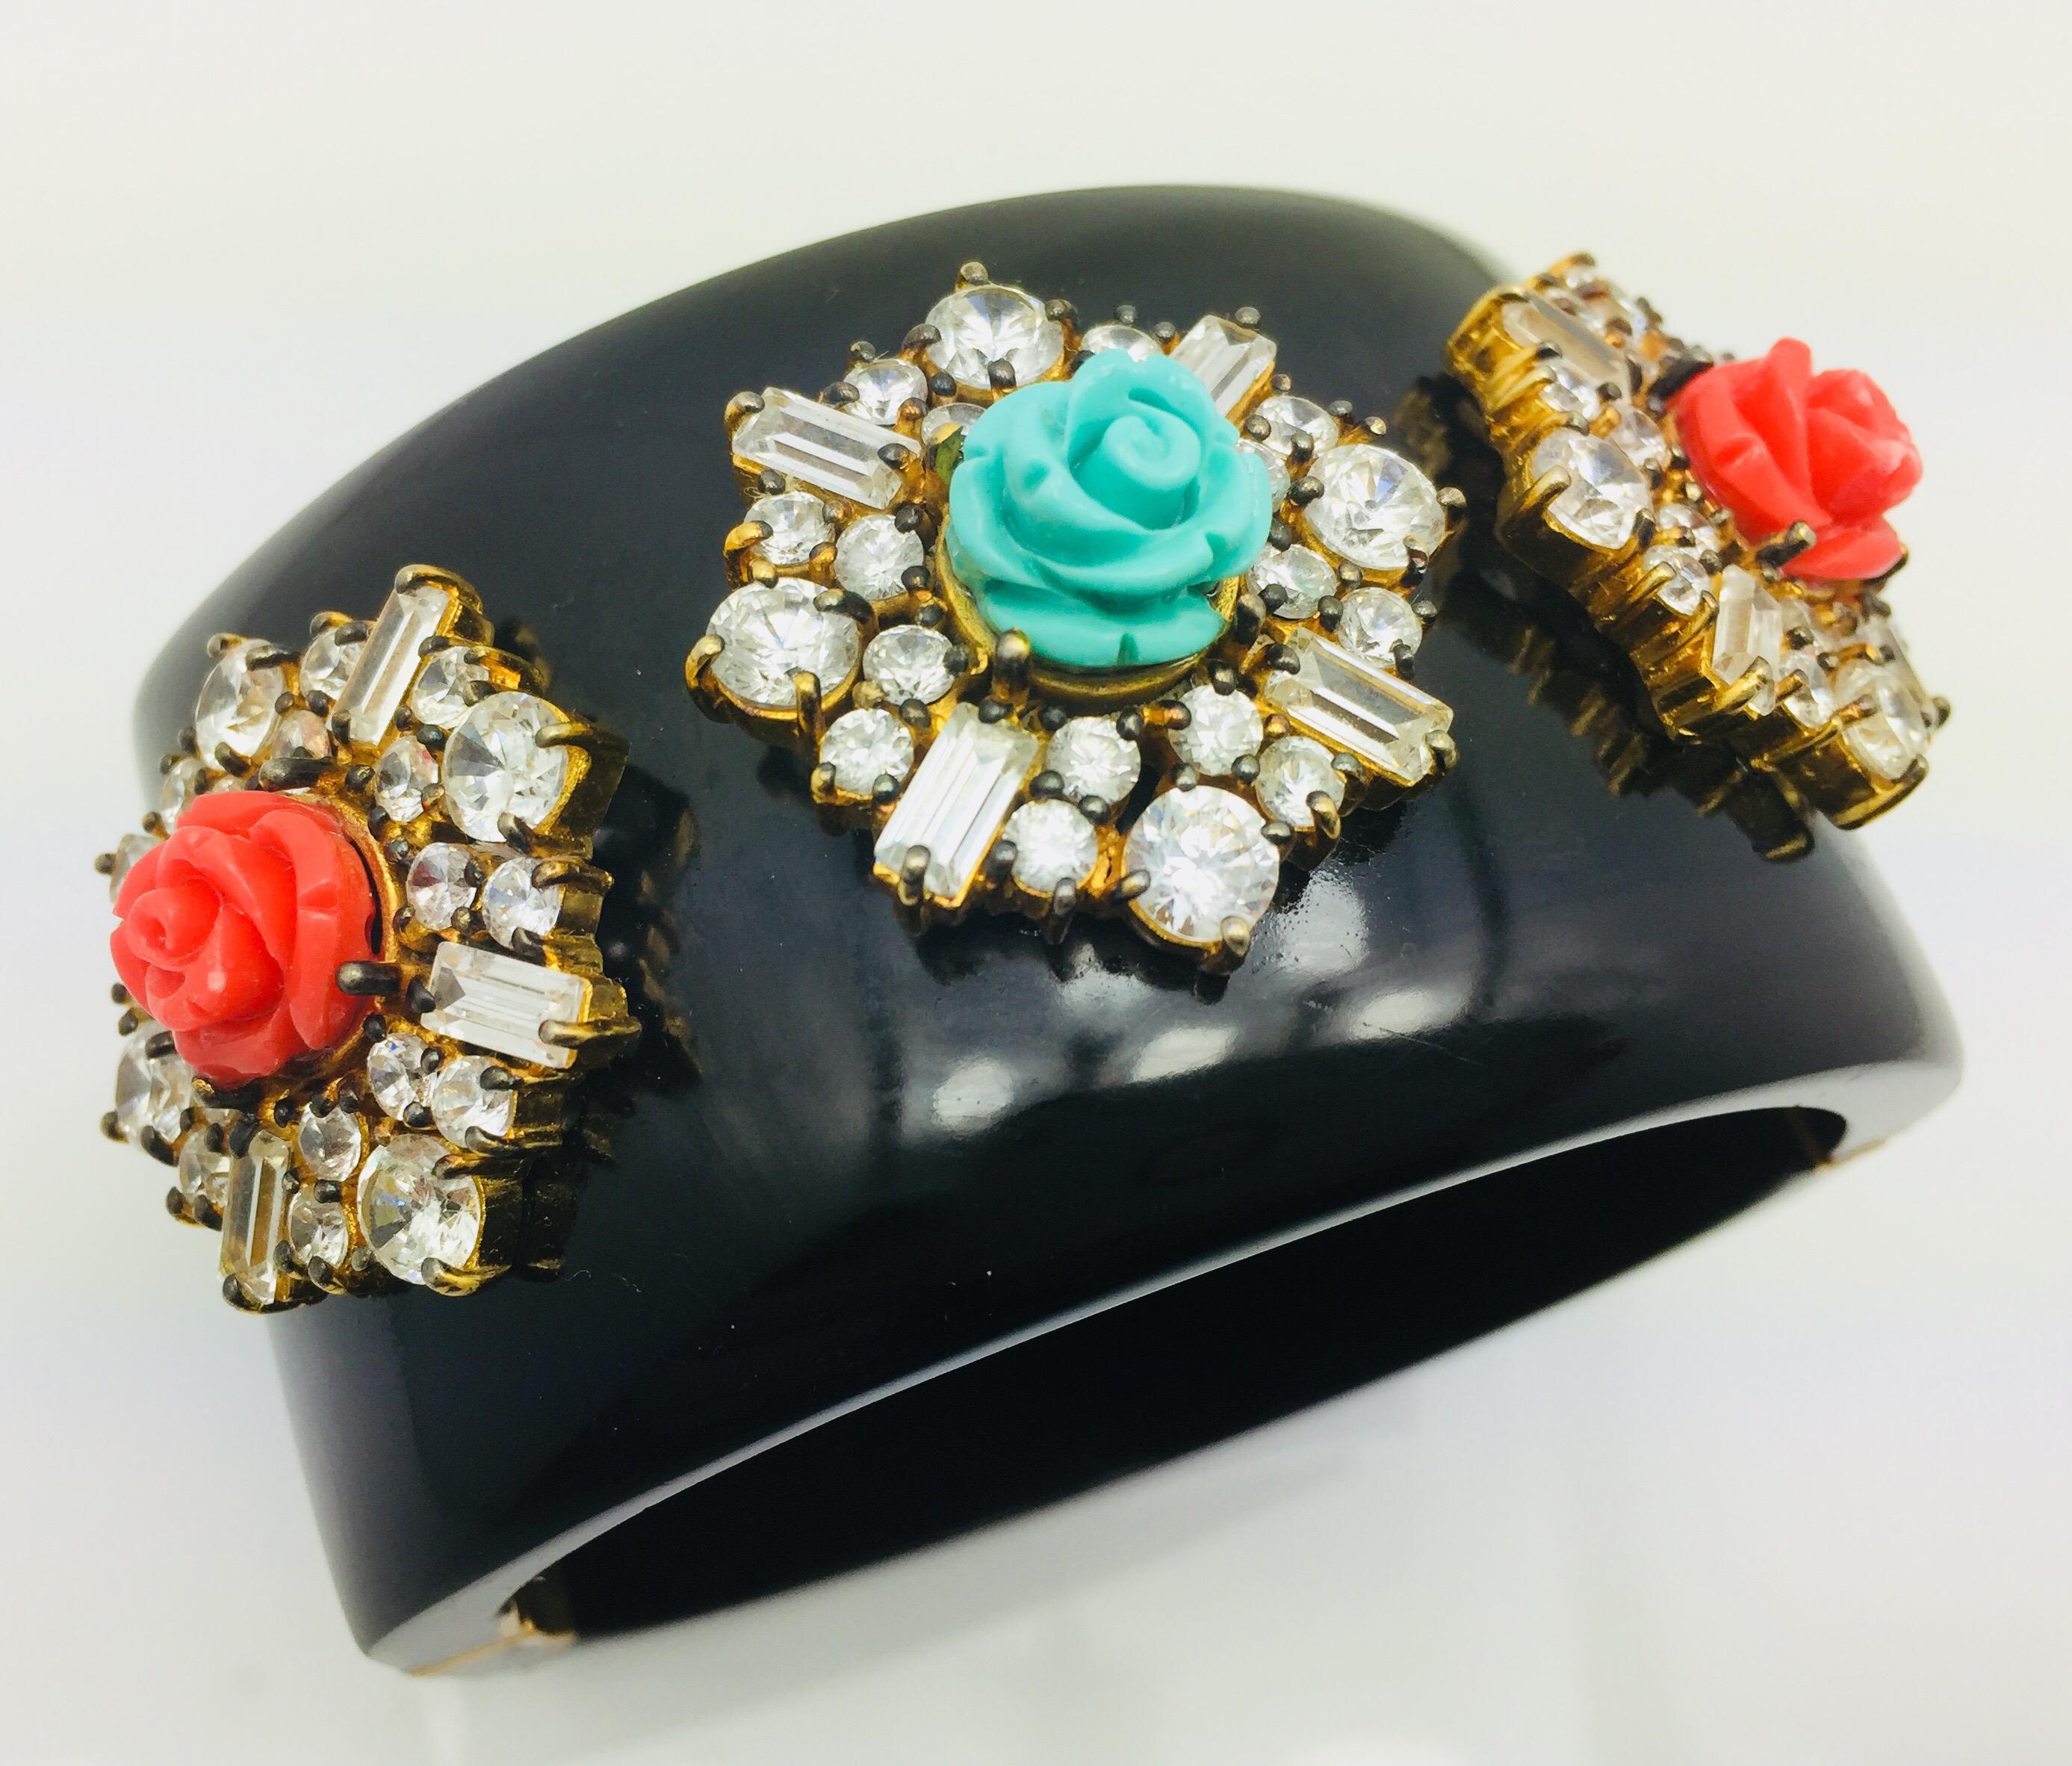 Statement Floral Black Resin Cuff is handcrafted with three hand carved floral rose.  The bold piece is embellished with  baguette crystals and cubic zircons on each motif. The bracelet is hinged and fastens with a push tab insert closure.  Only 1